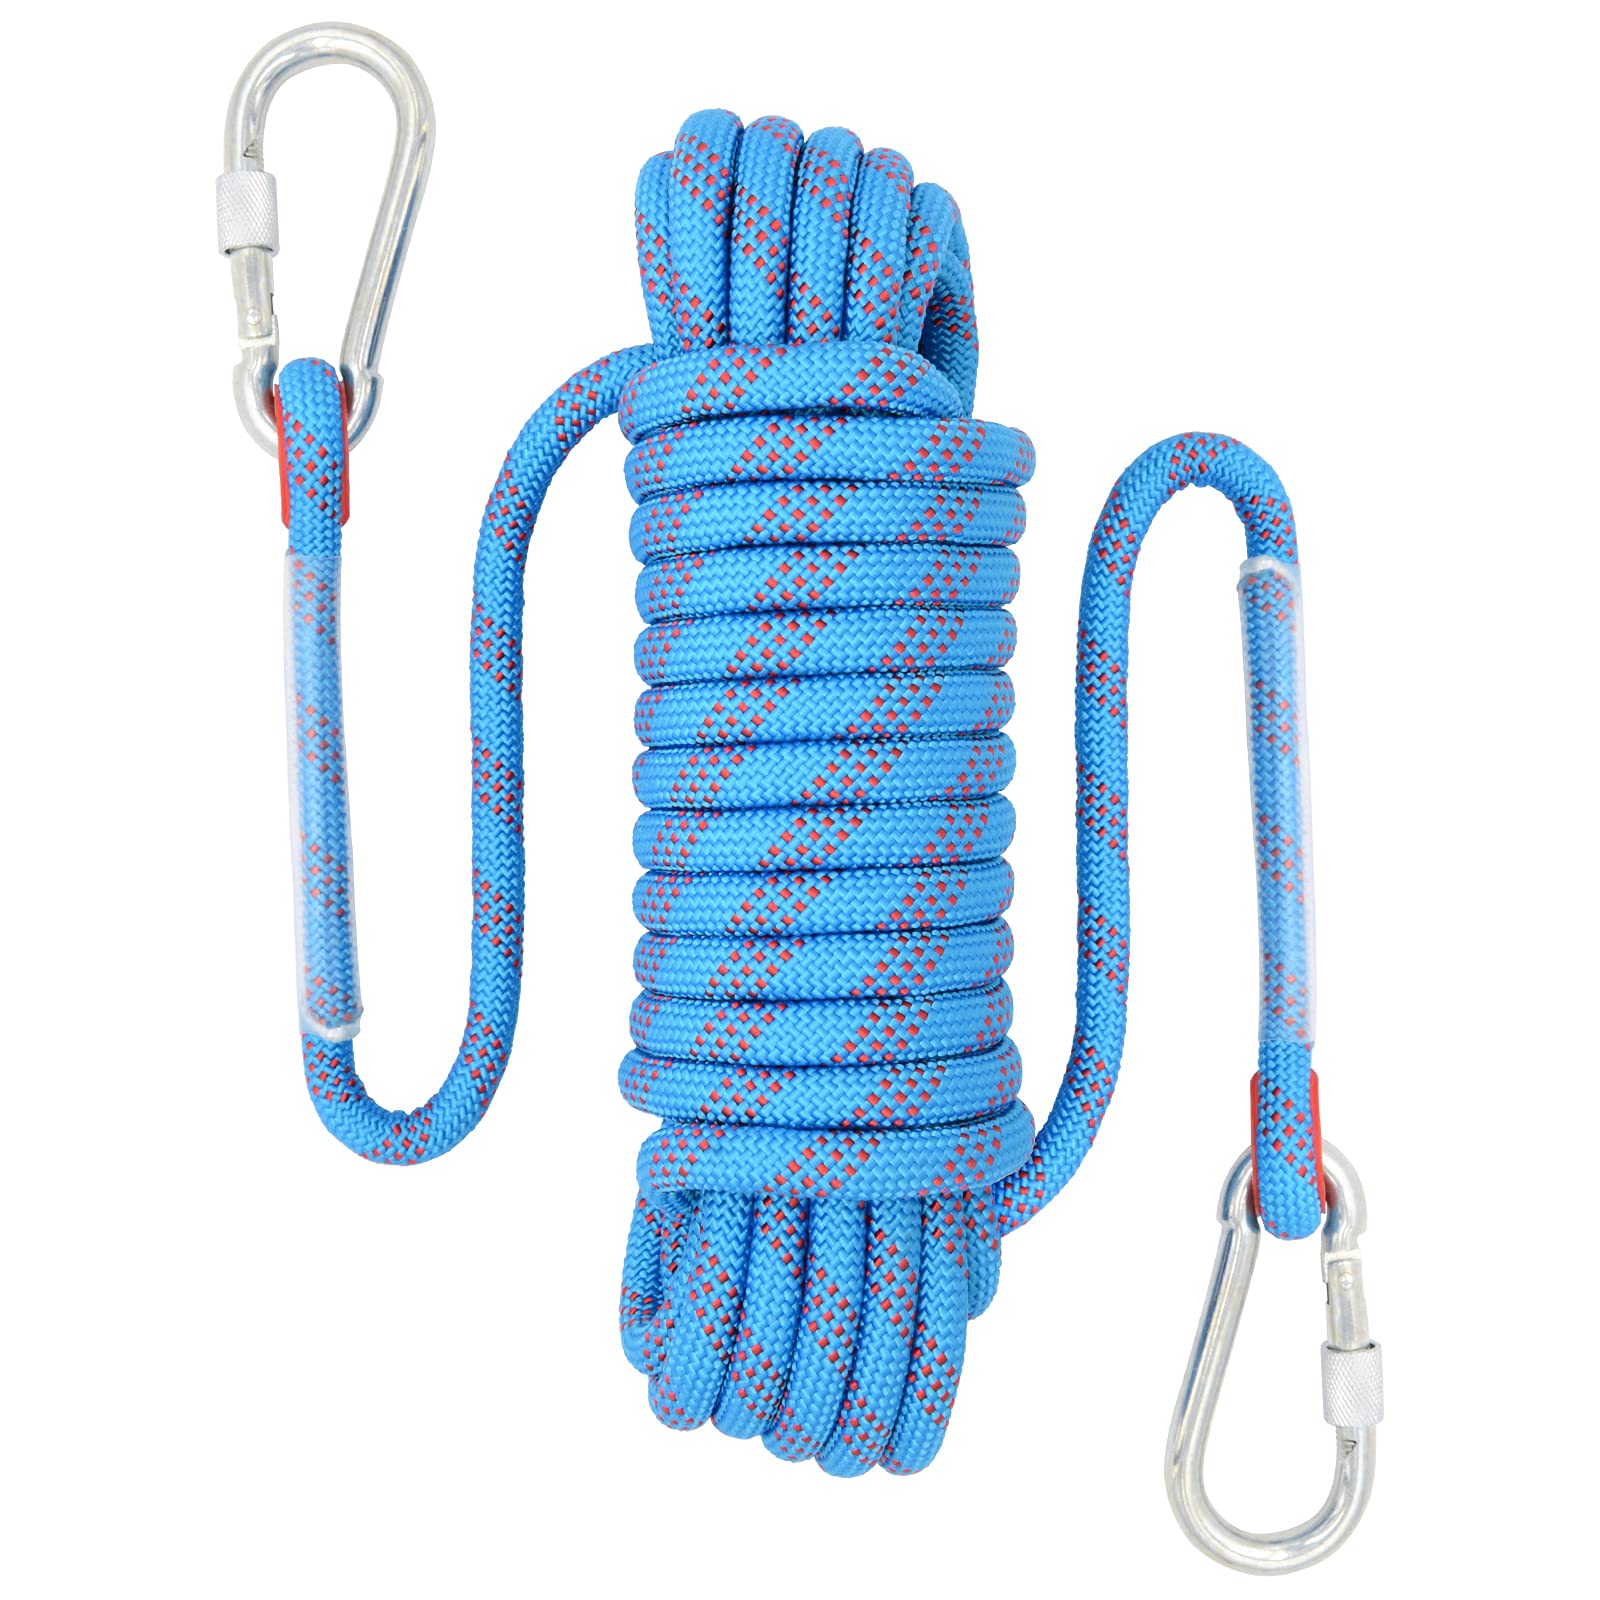 DEFIMOB Climbing Rope,12mm/ 10mm Static Outdoor Rock Climbing Rope